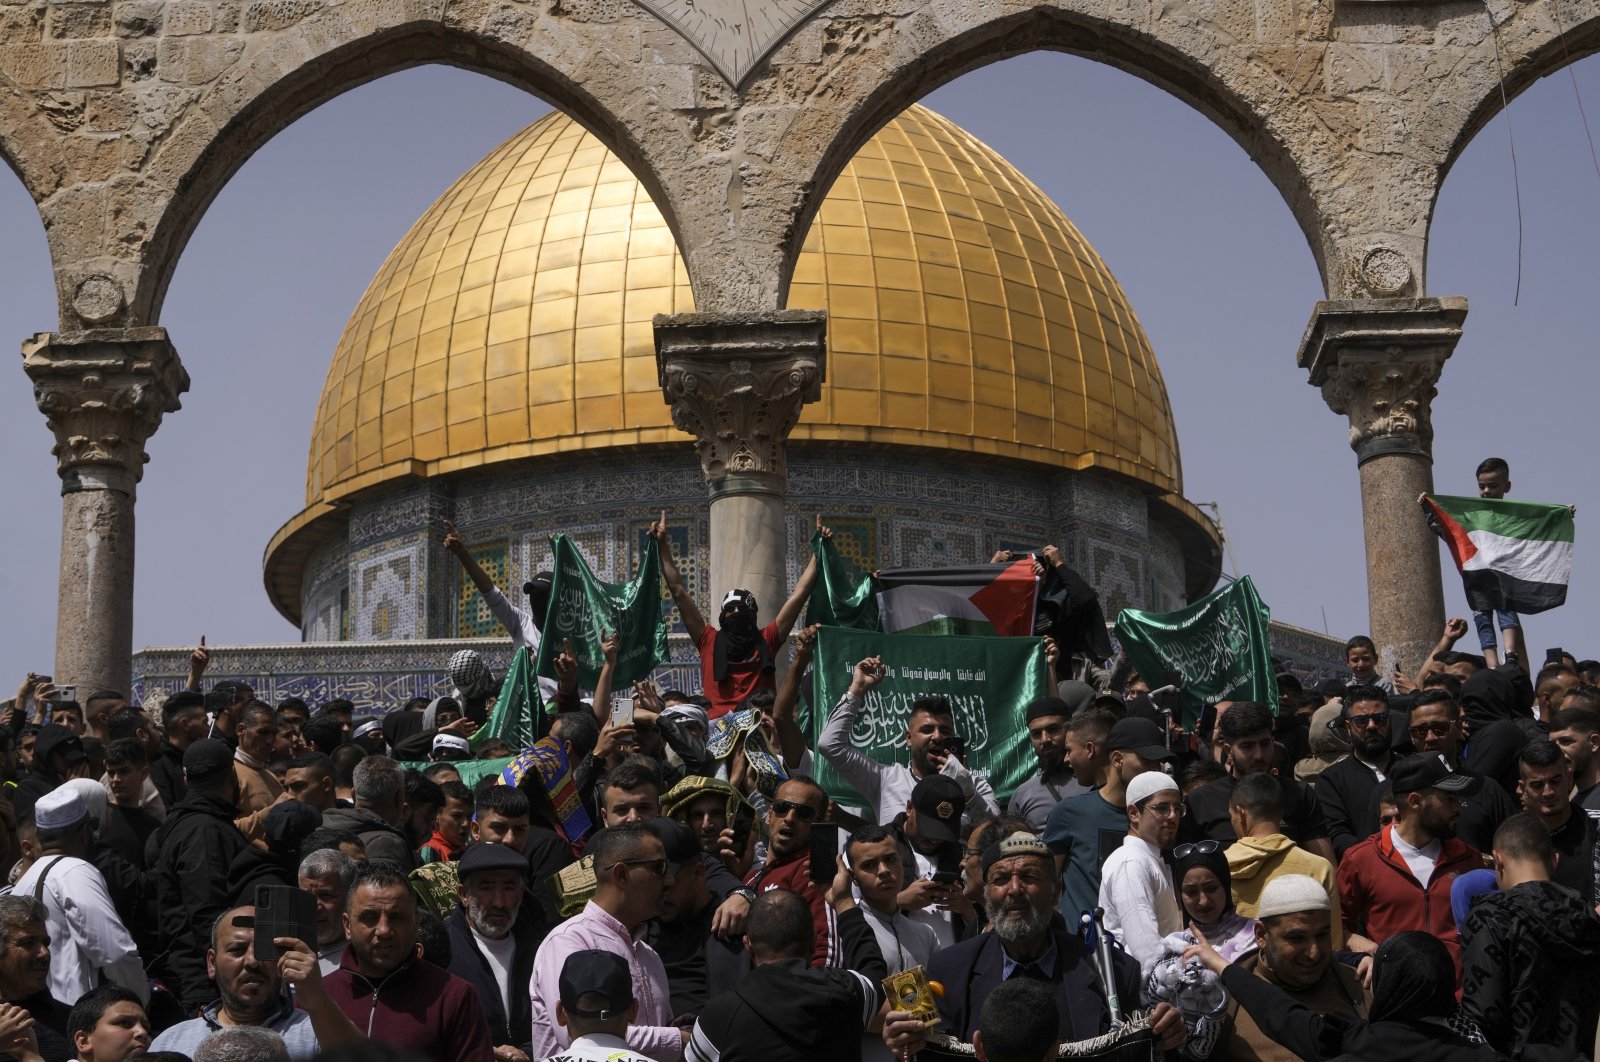 Palestinians hold the Palestinian national flag and the flag of the Hamas militant group during a protest by the Dome of Rock at the Al-Aqsa Mosque compound during the Muslim holy month of Ramadan, in the Old City of Jerusalem, Palestine, April 7, 2023. (AP Photo)